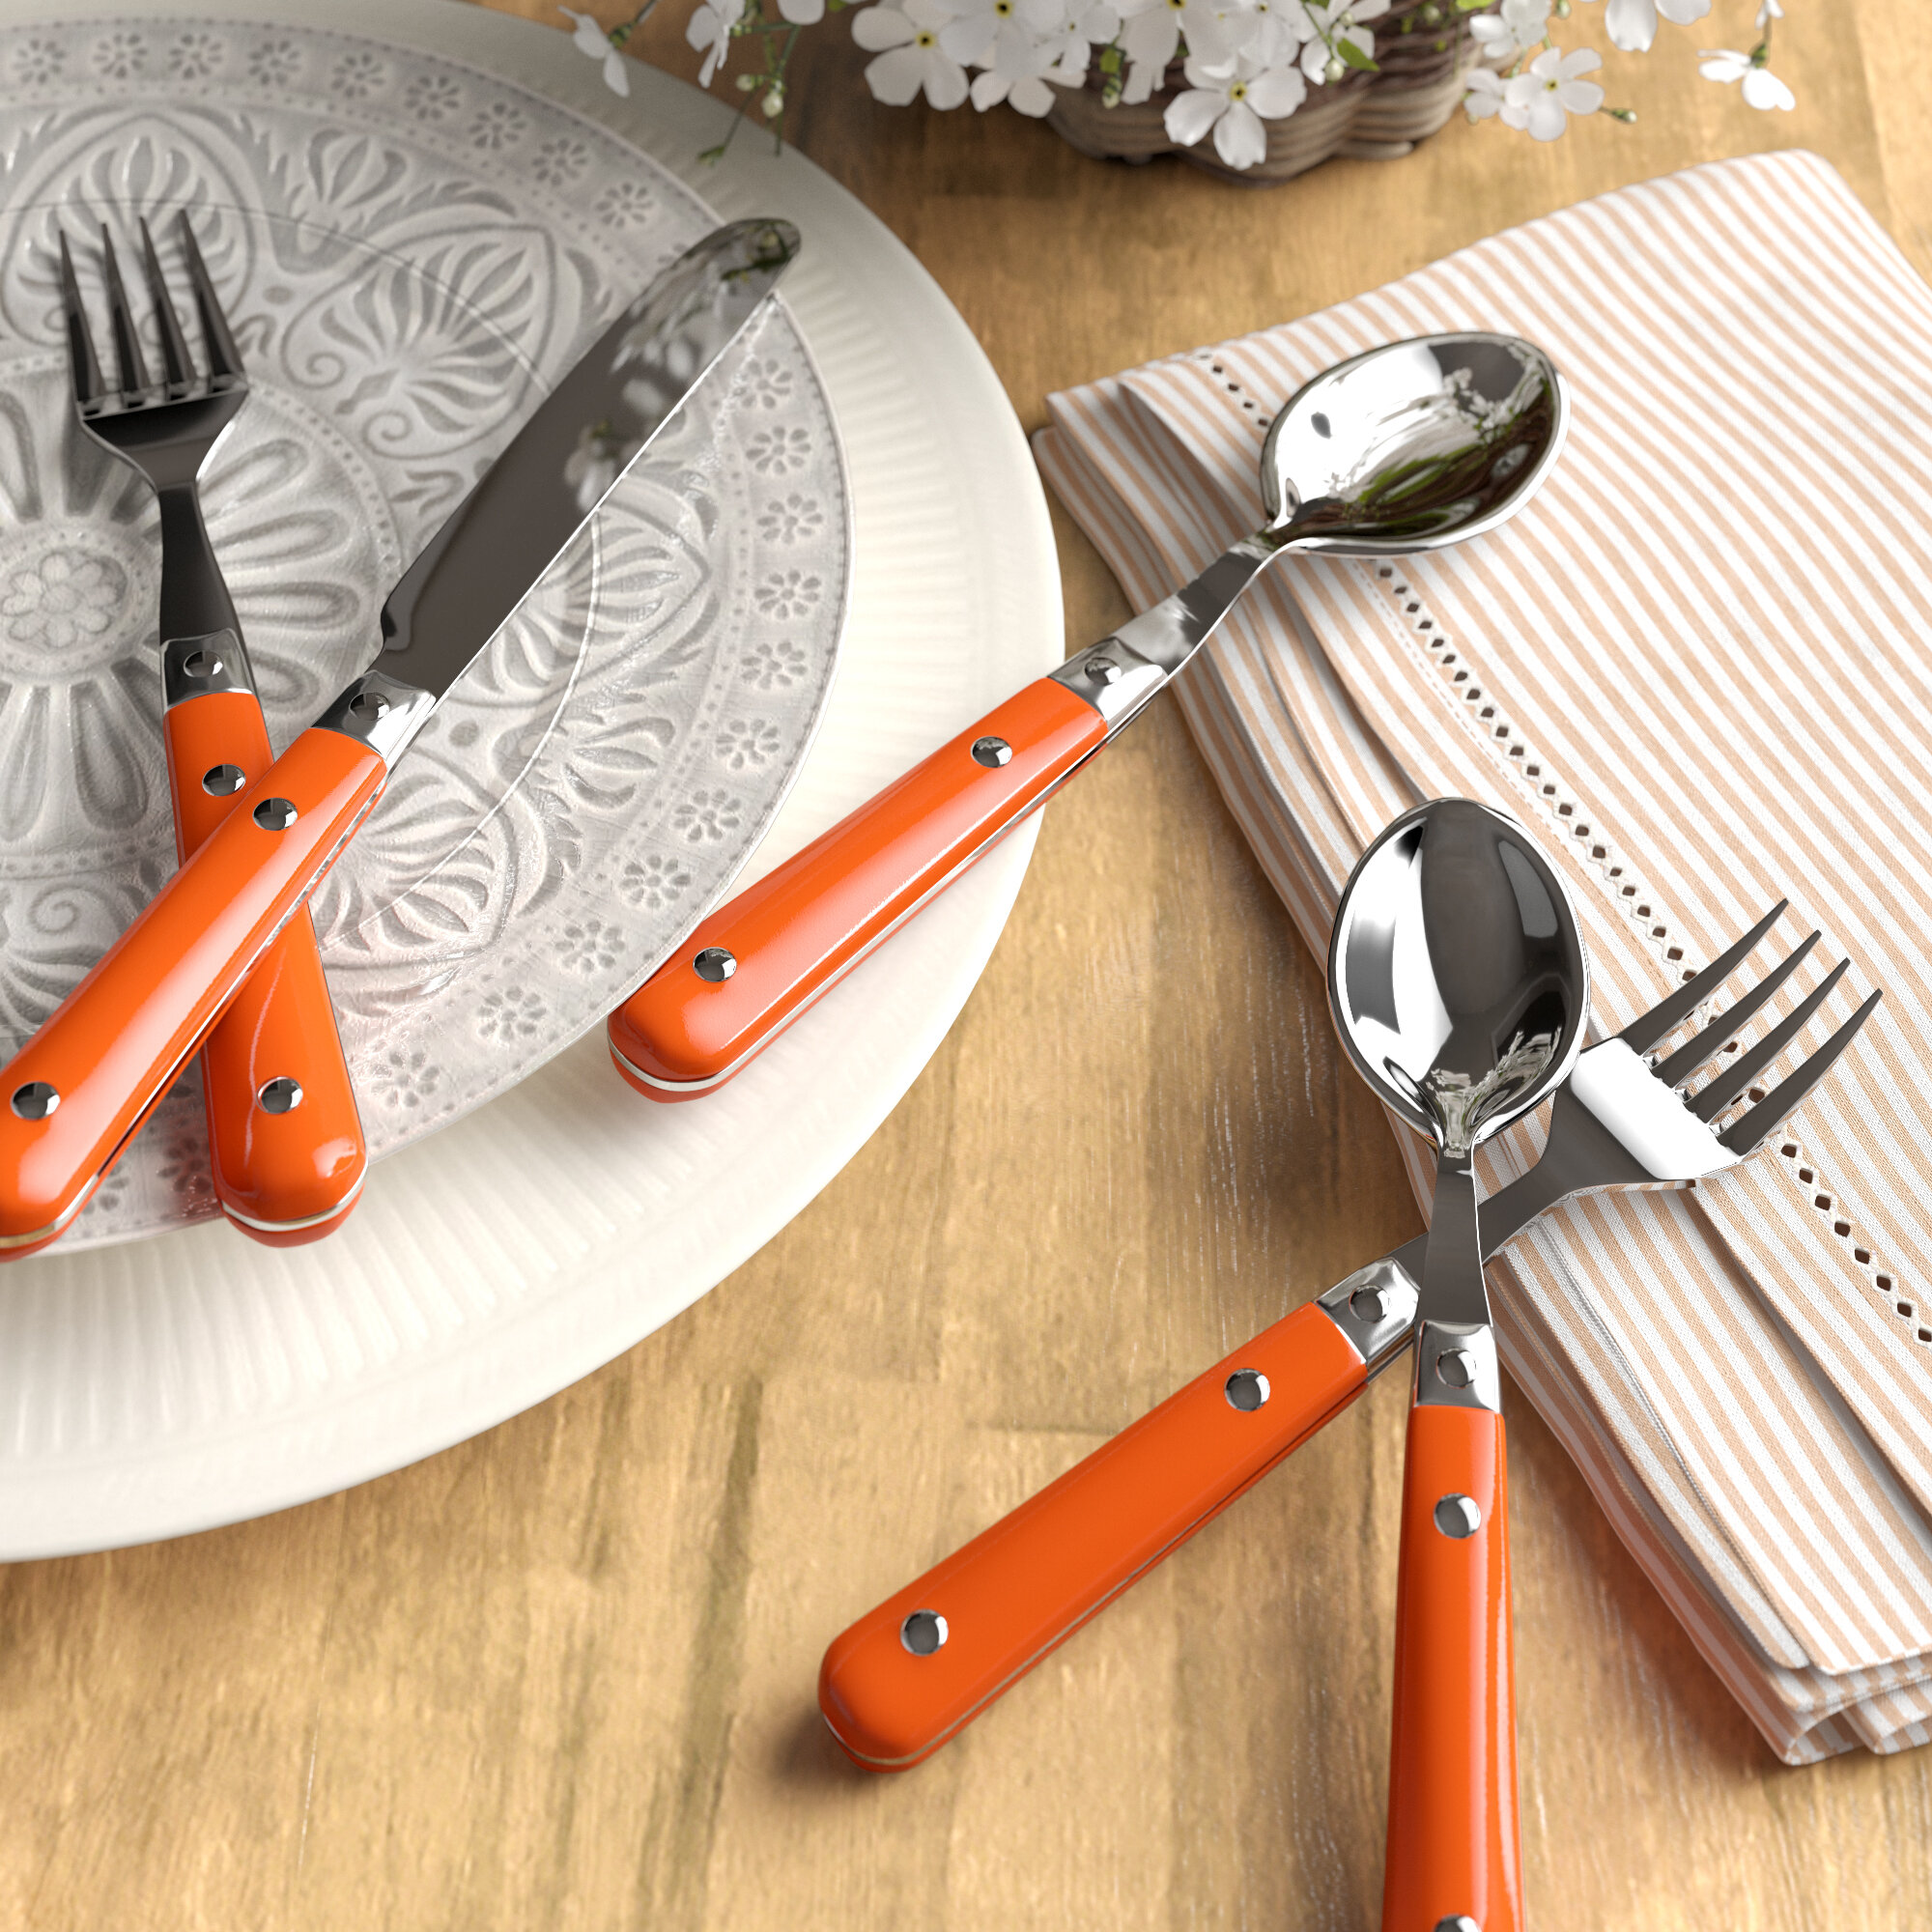 Kanto Stainless Steel Flatware Sets